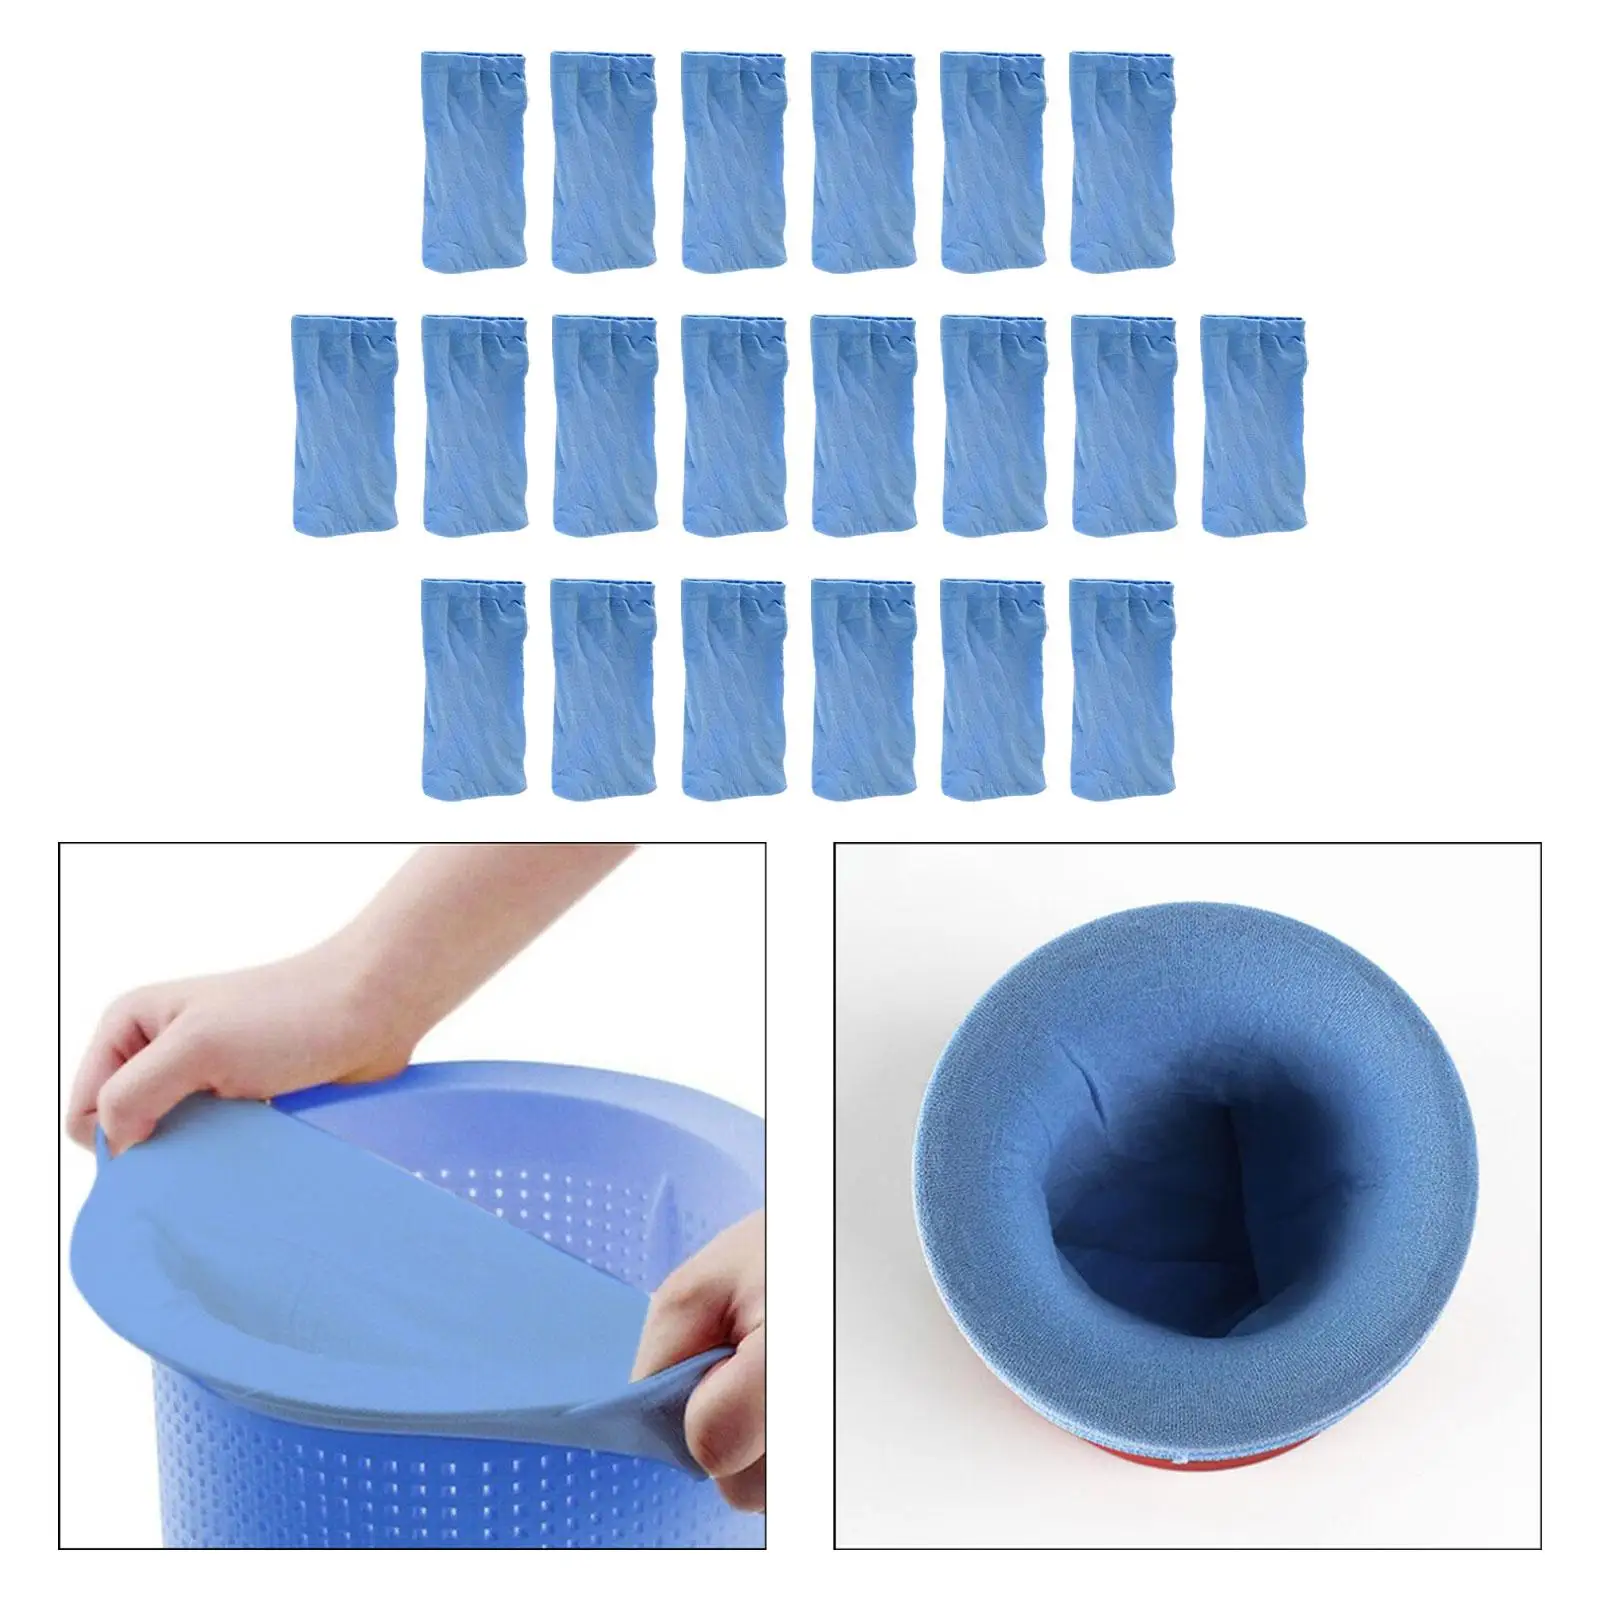 20x Pool Skimmer Socks Pool Cleaning Tools Reusable Lightweight Round Pool Net Swimming Pool Filter for Baskets Filters